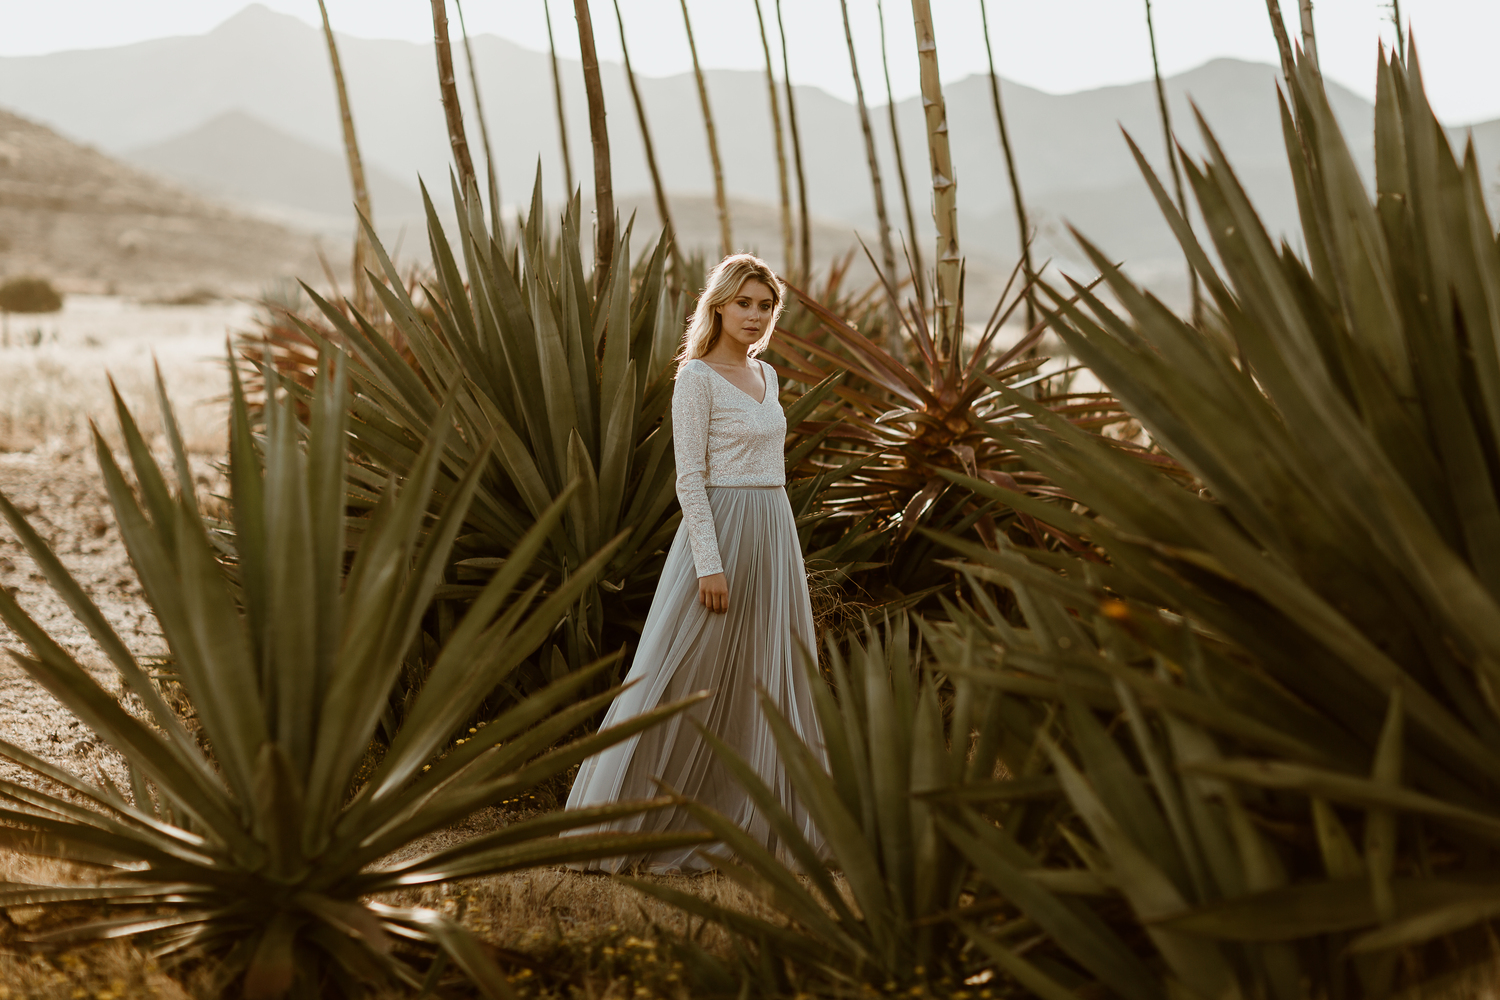 Noni – Perfect wedding dresses for your beach wedding